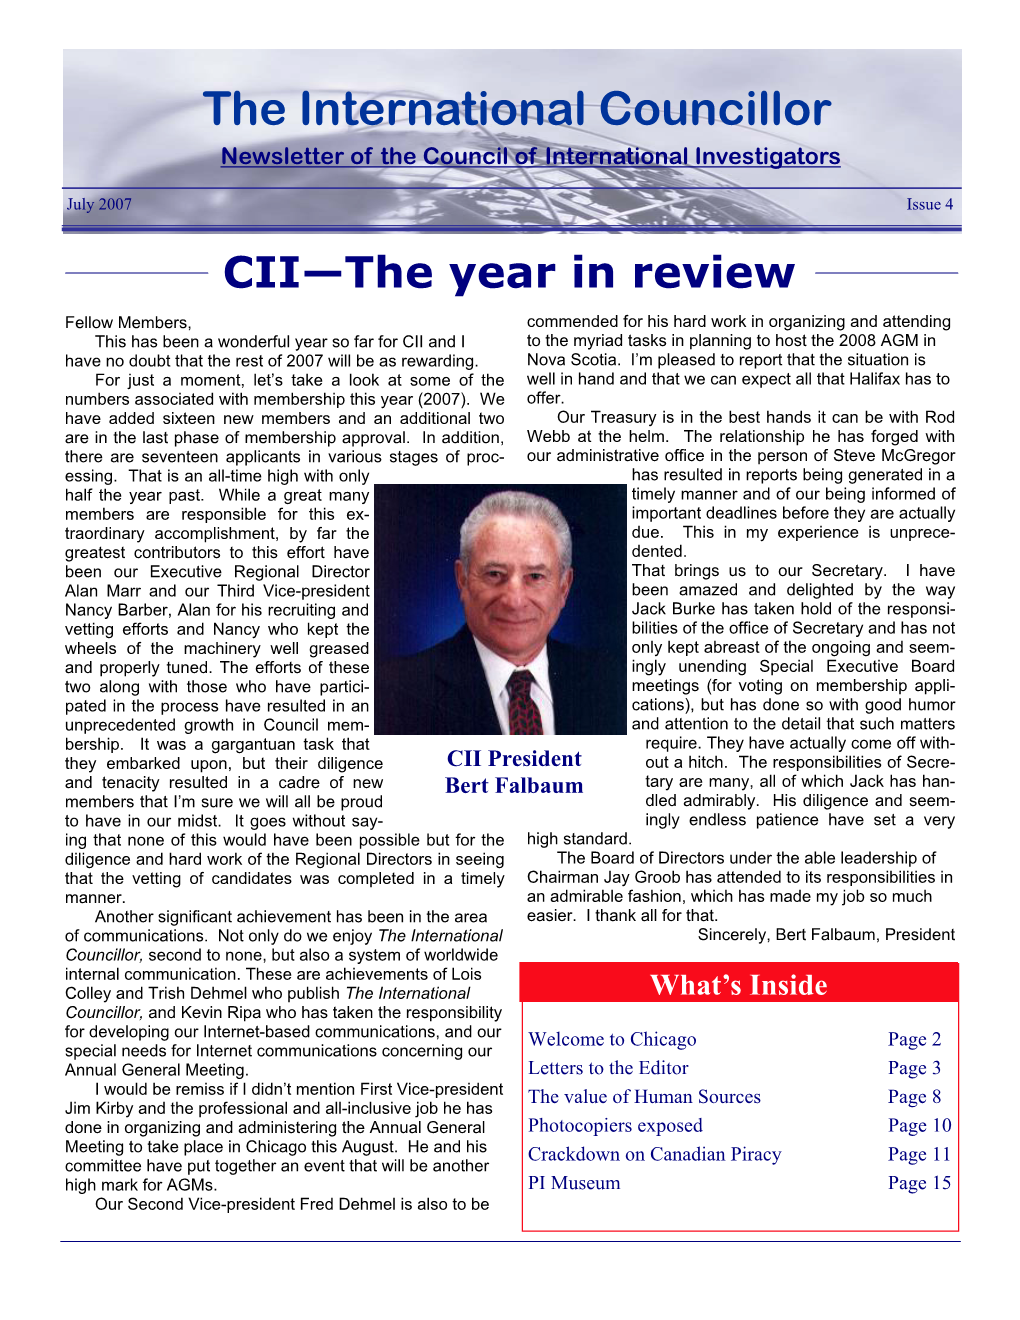 July 2007 Issue 4 CII—The Year in Review